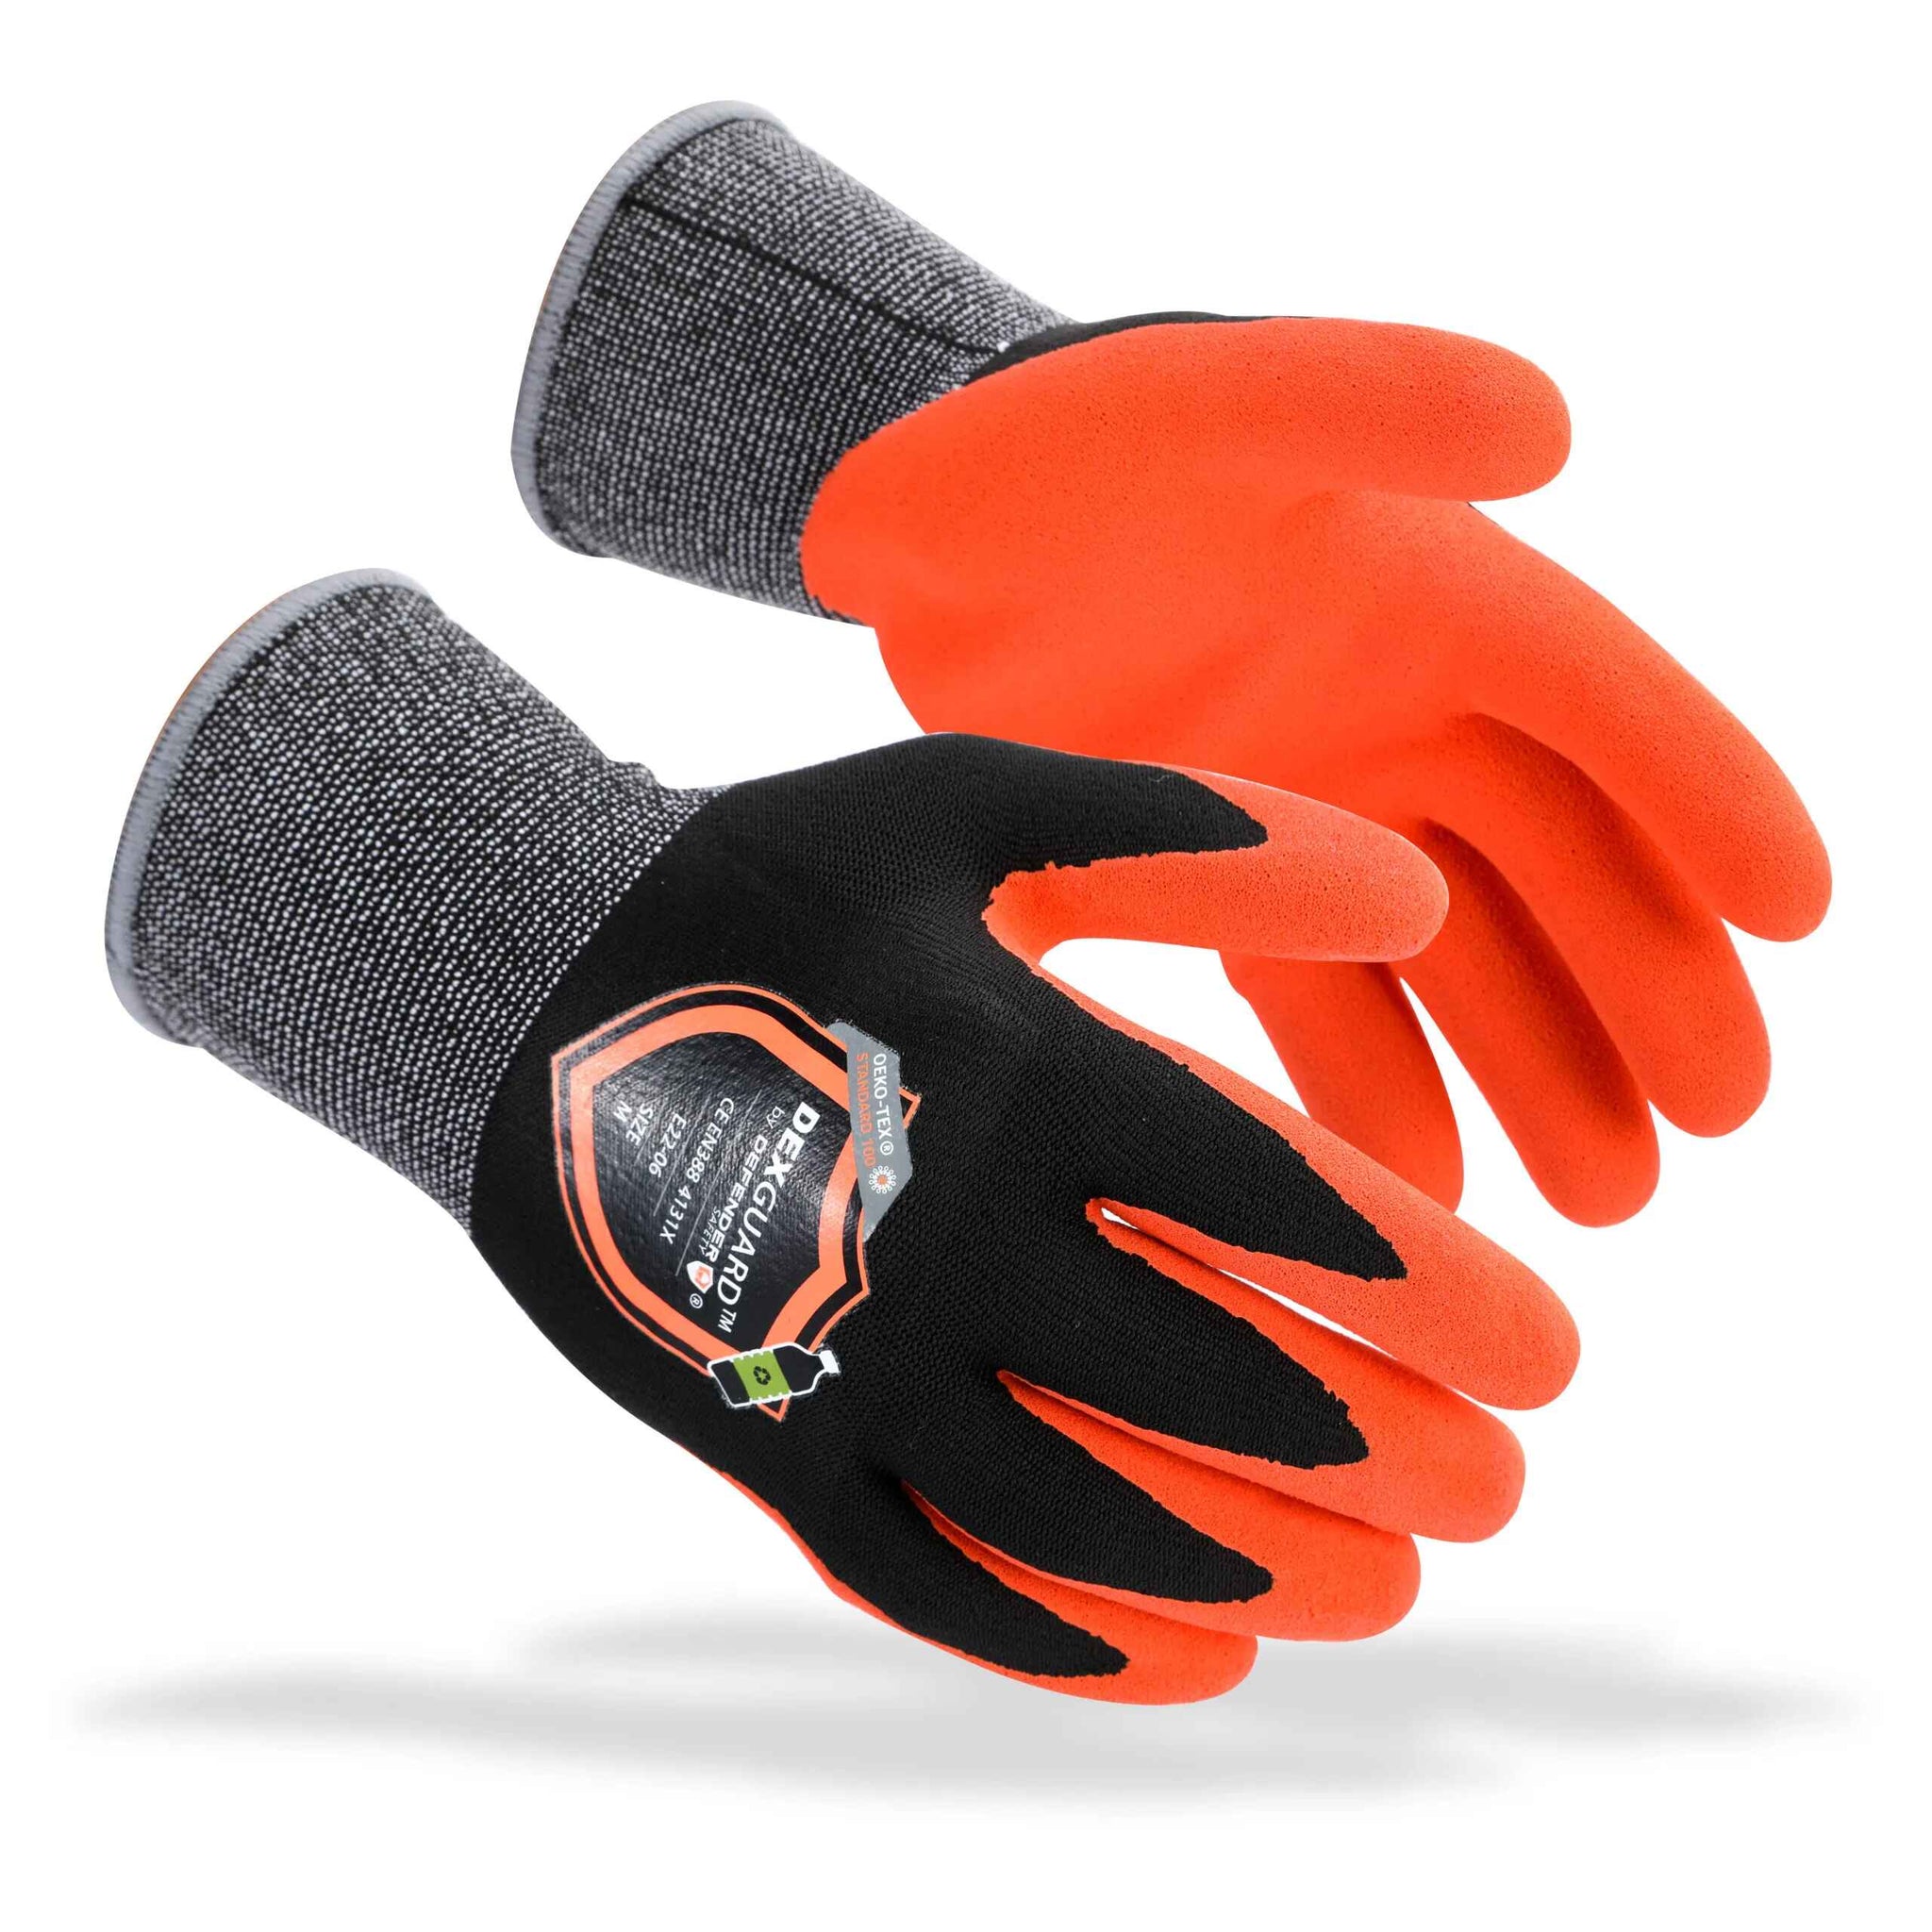 DEXGUARD™ A6 Cut Gloves, Level 4 Abrasion Resistant, Textured Nitrile  Coating, Touch Screen Compatible